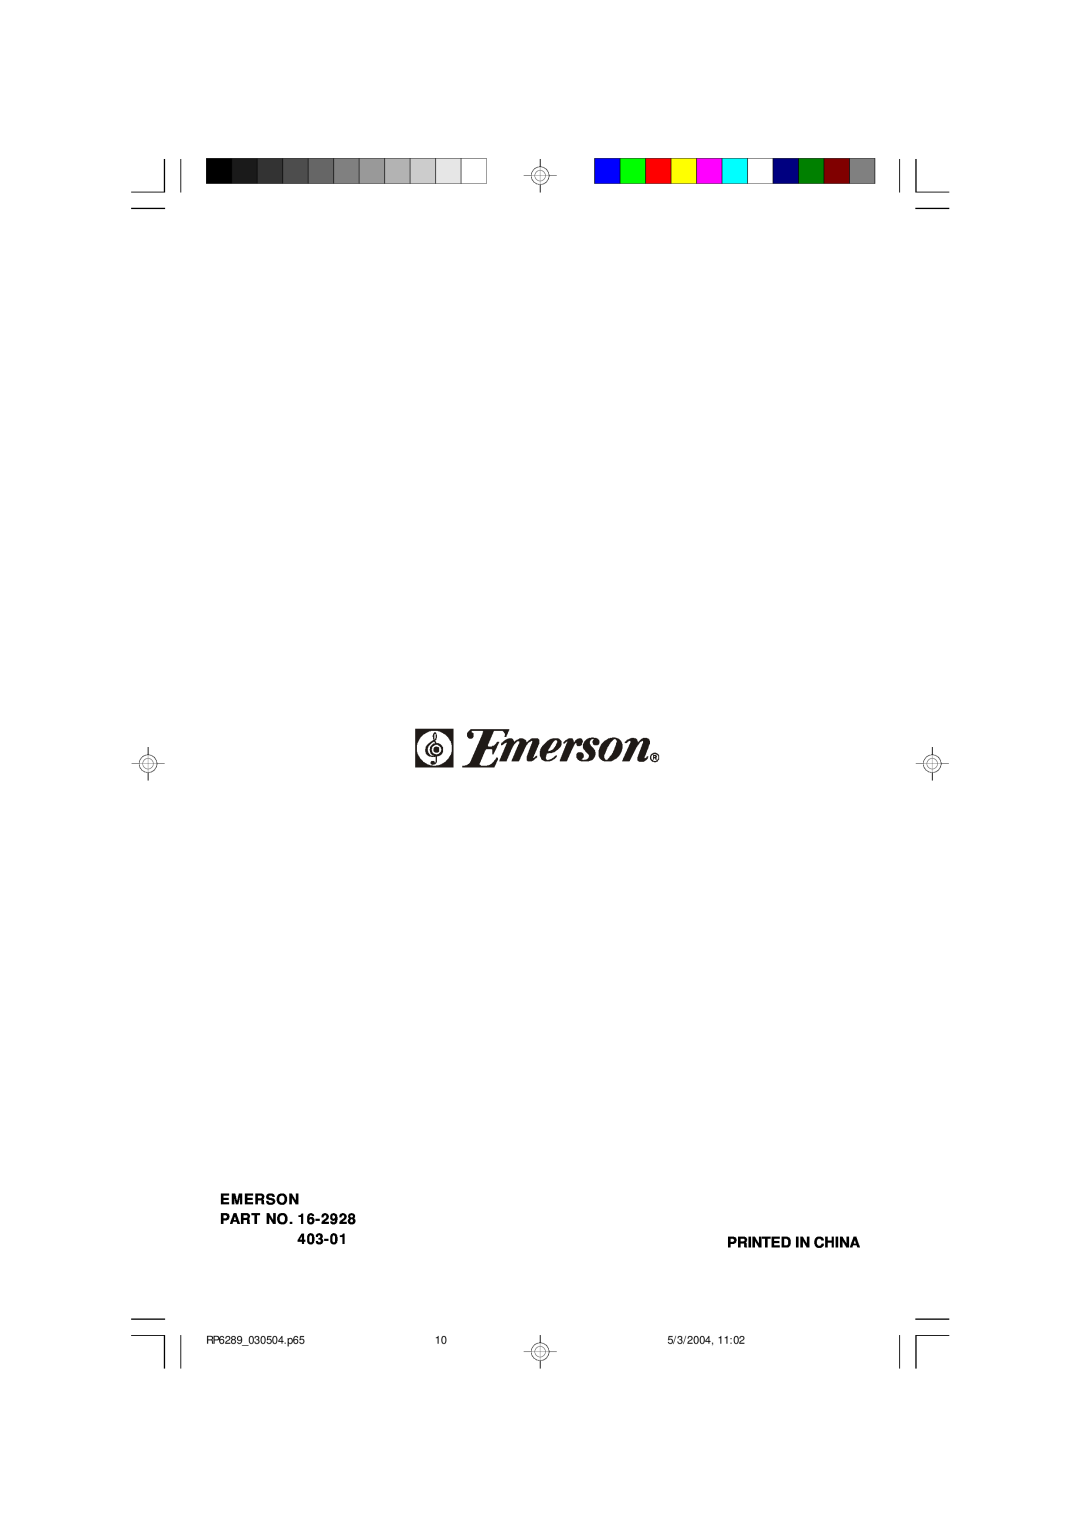 Emerson owner manual Emerson, 403-01, RP6289 030504.p65, 5/3/2004 